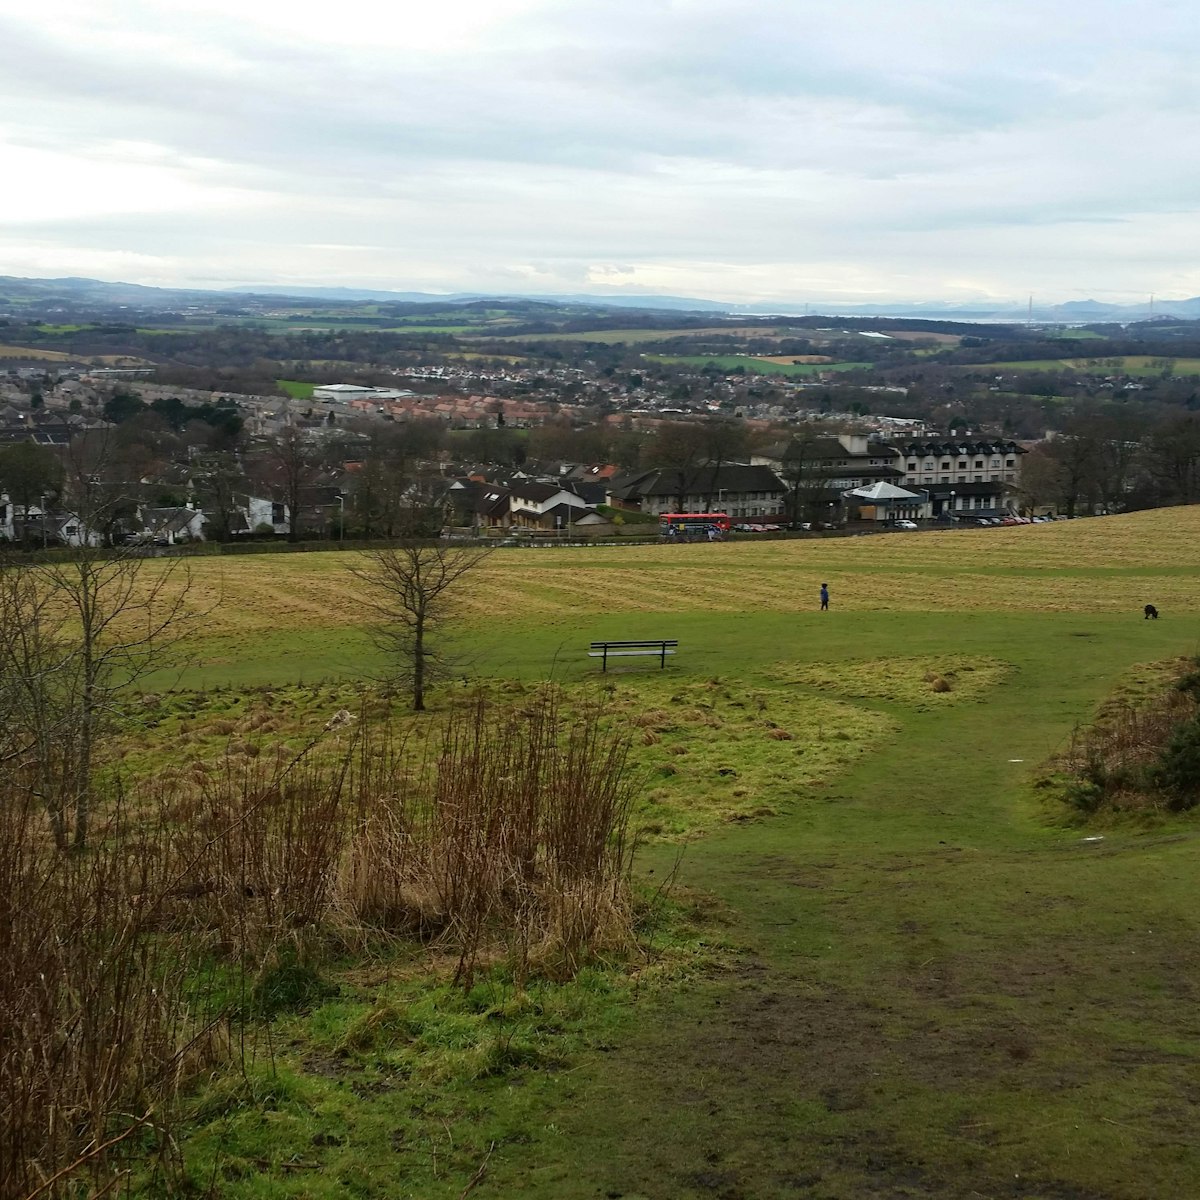 The view from the top of Corstorphine Hill